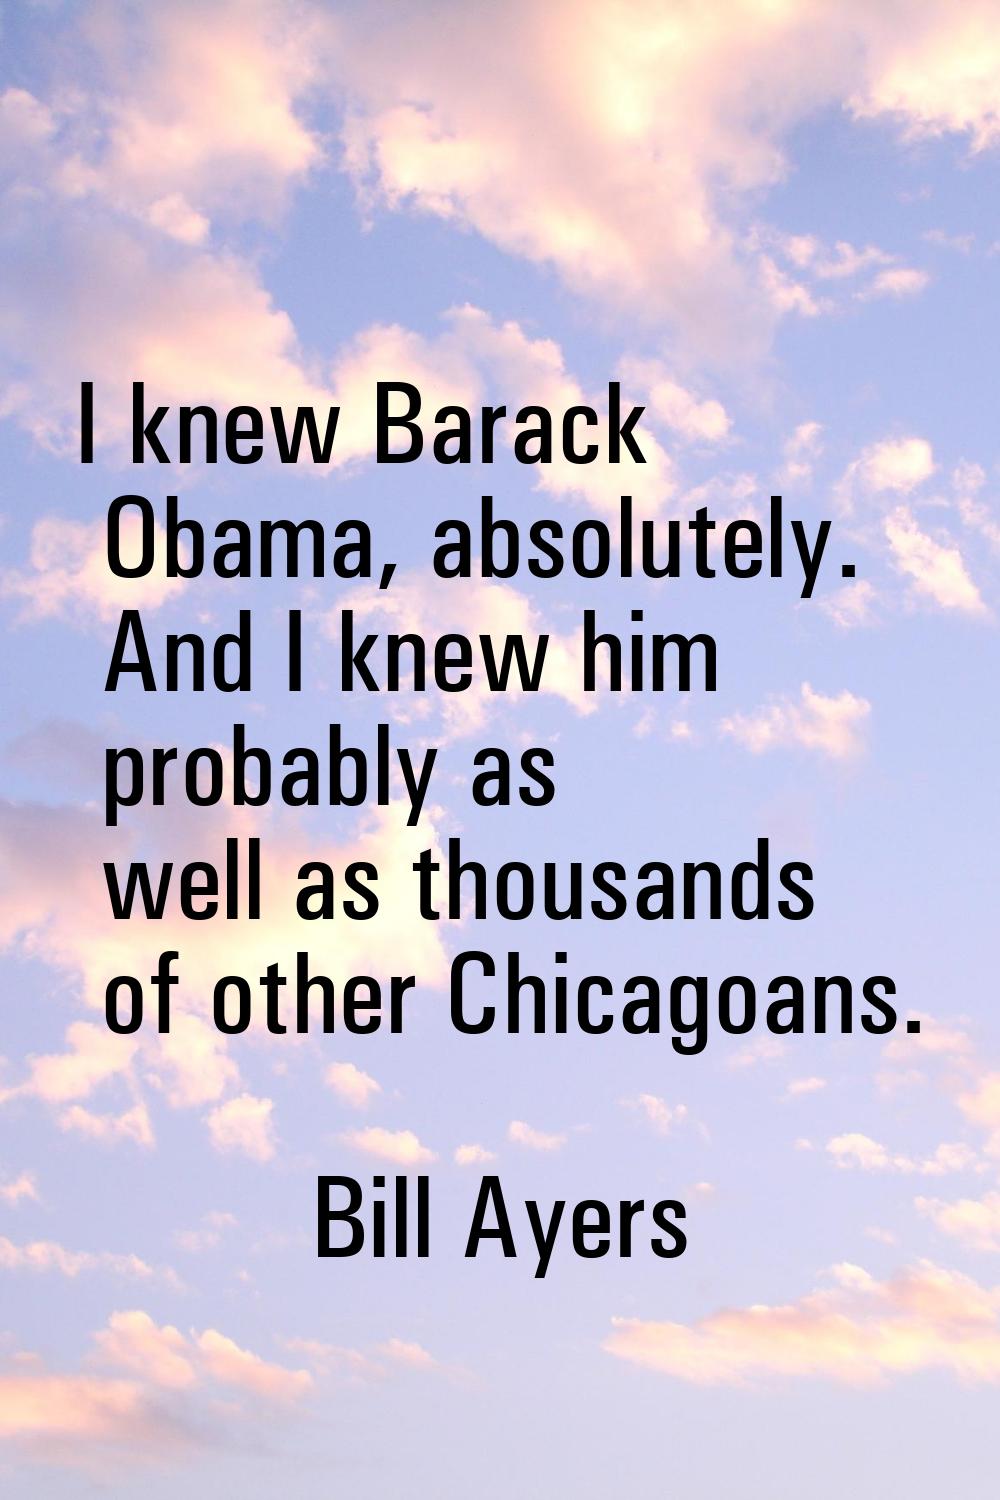 I knew Barack Obama, absolutely. And I knew him probably as well as thousands of other Chicagoans.